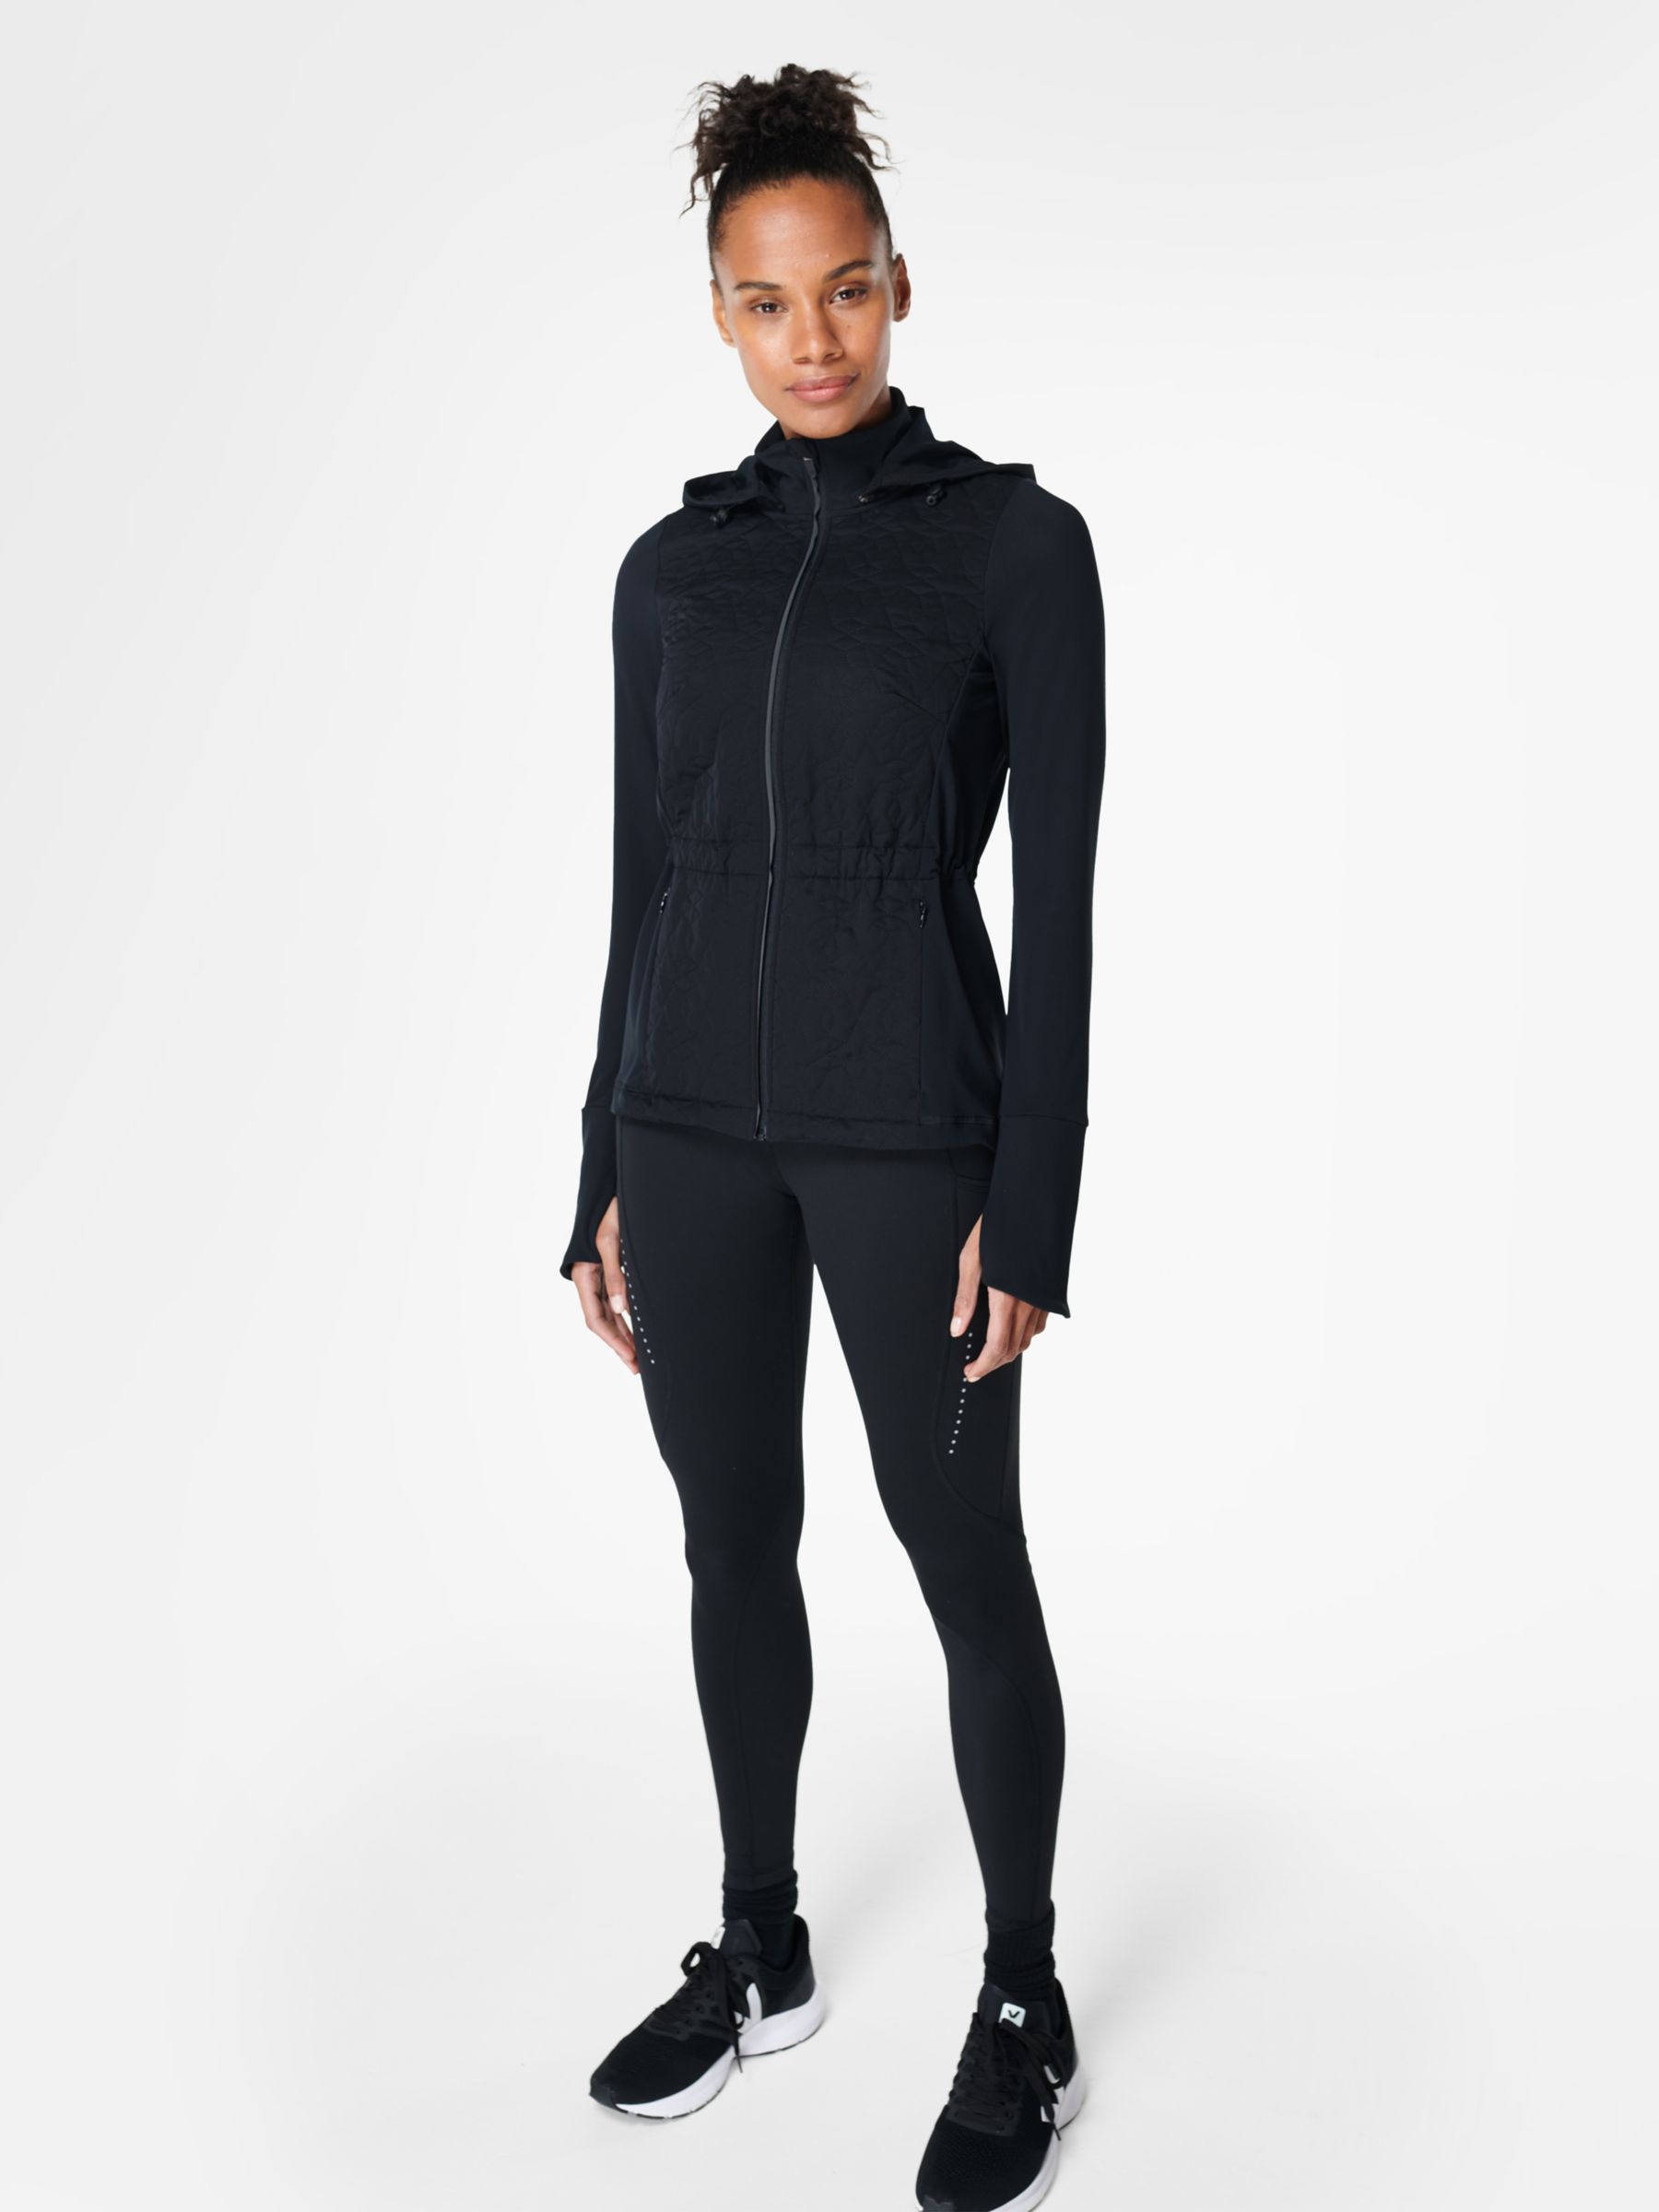 Sweaty Betty Fast Track Thermal Quilted Running Jacket, Black, XXS